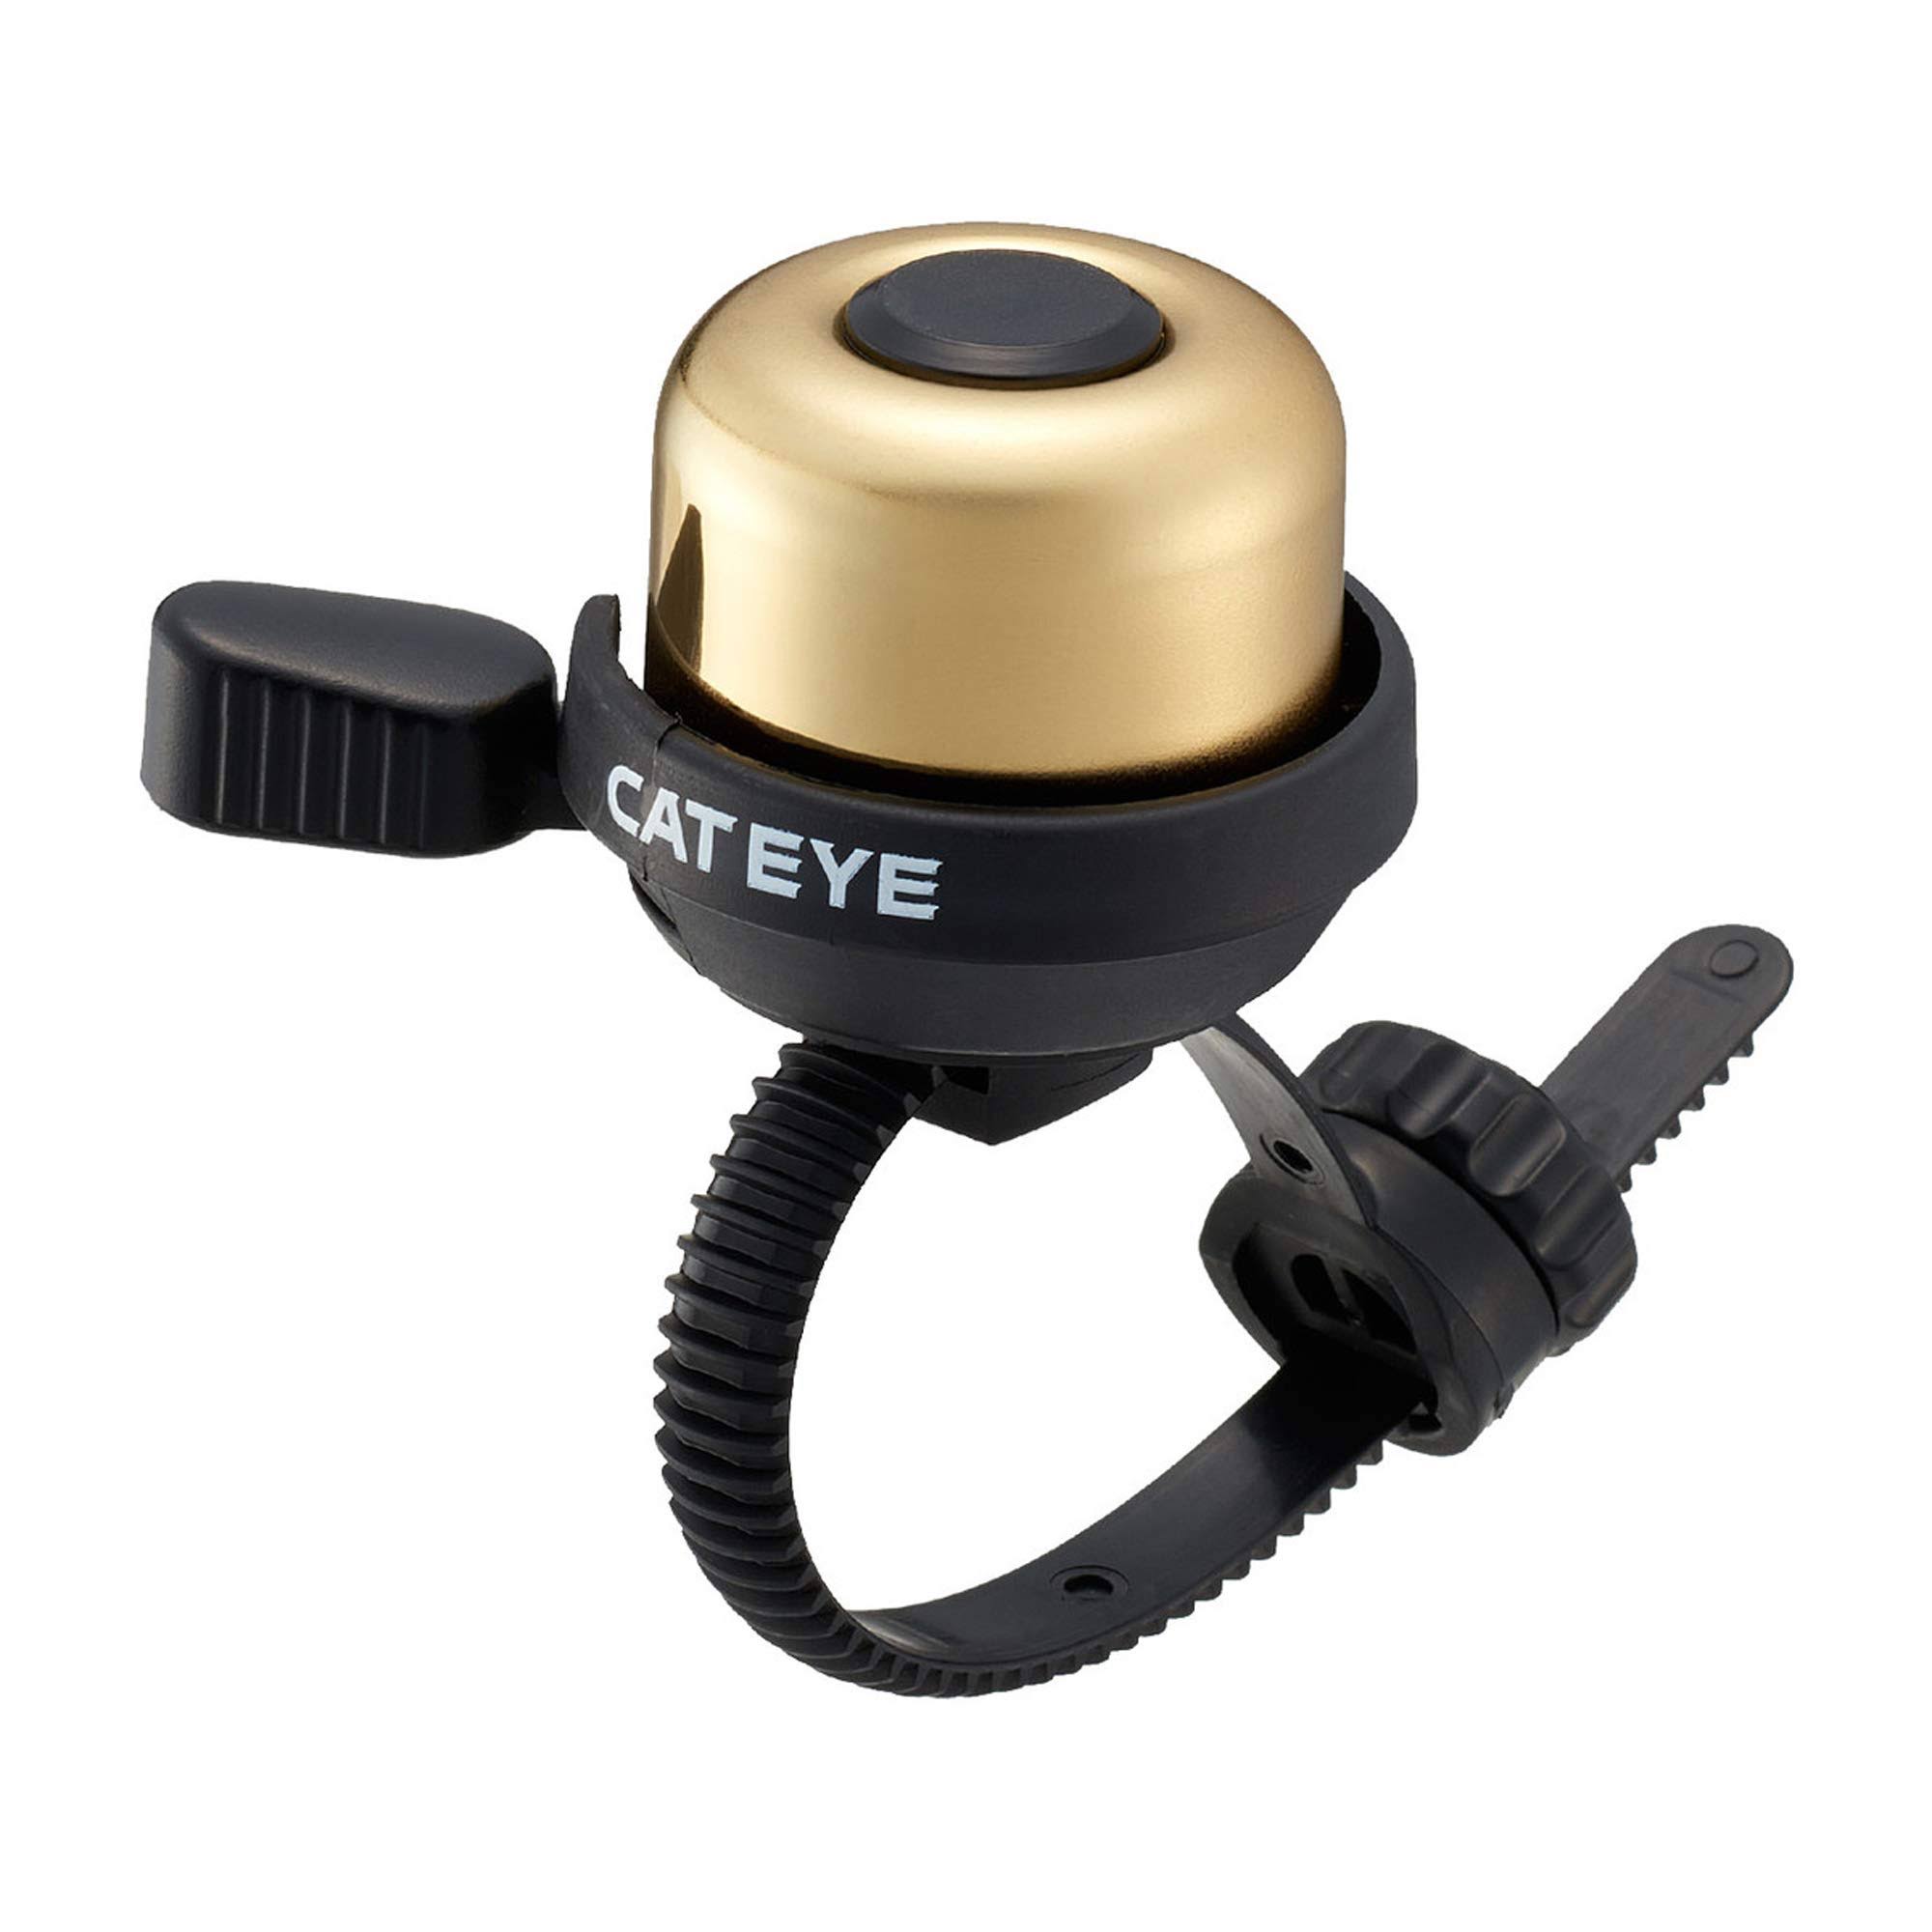 CatEye PB-1100 Gold Bicycle Bell